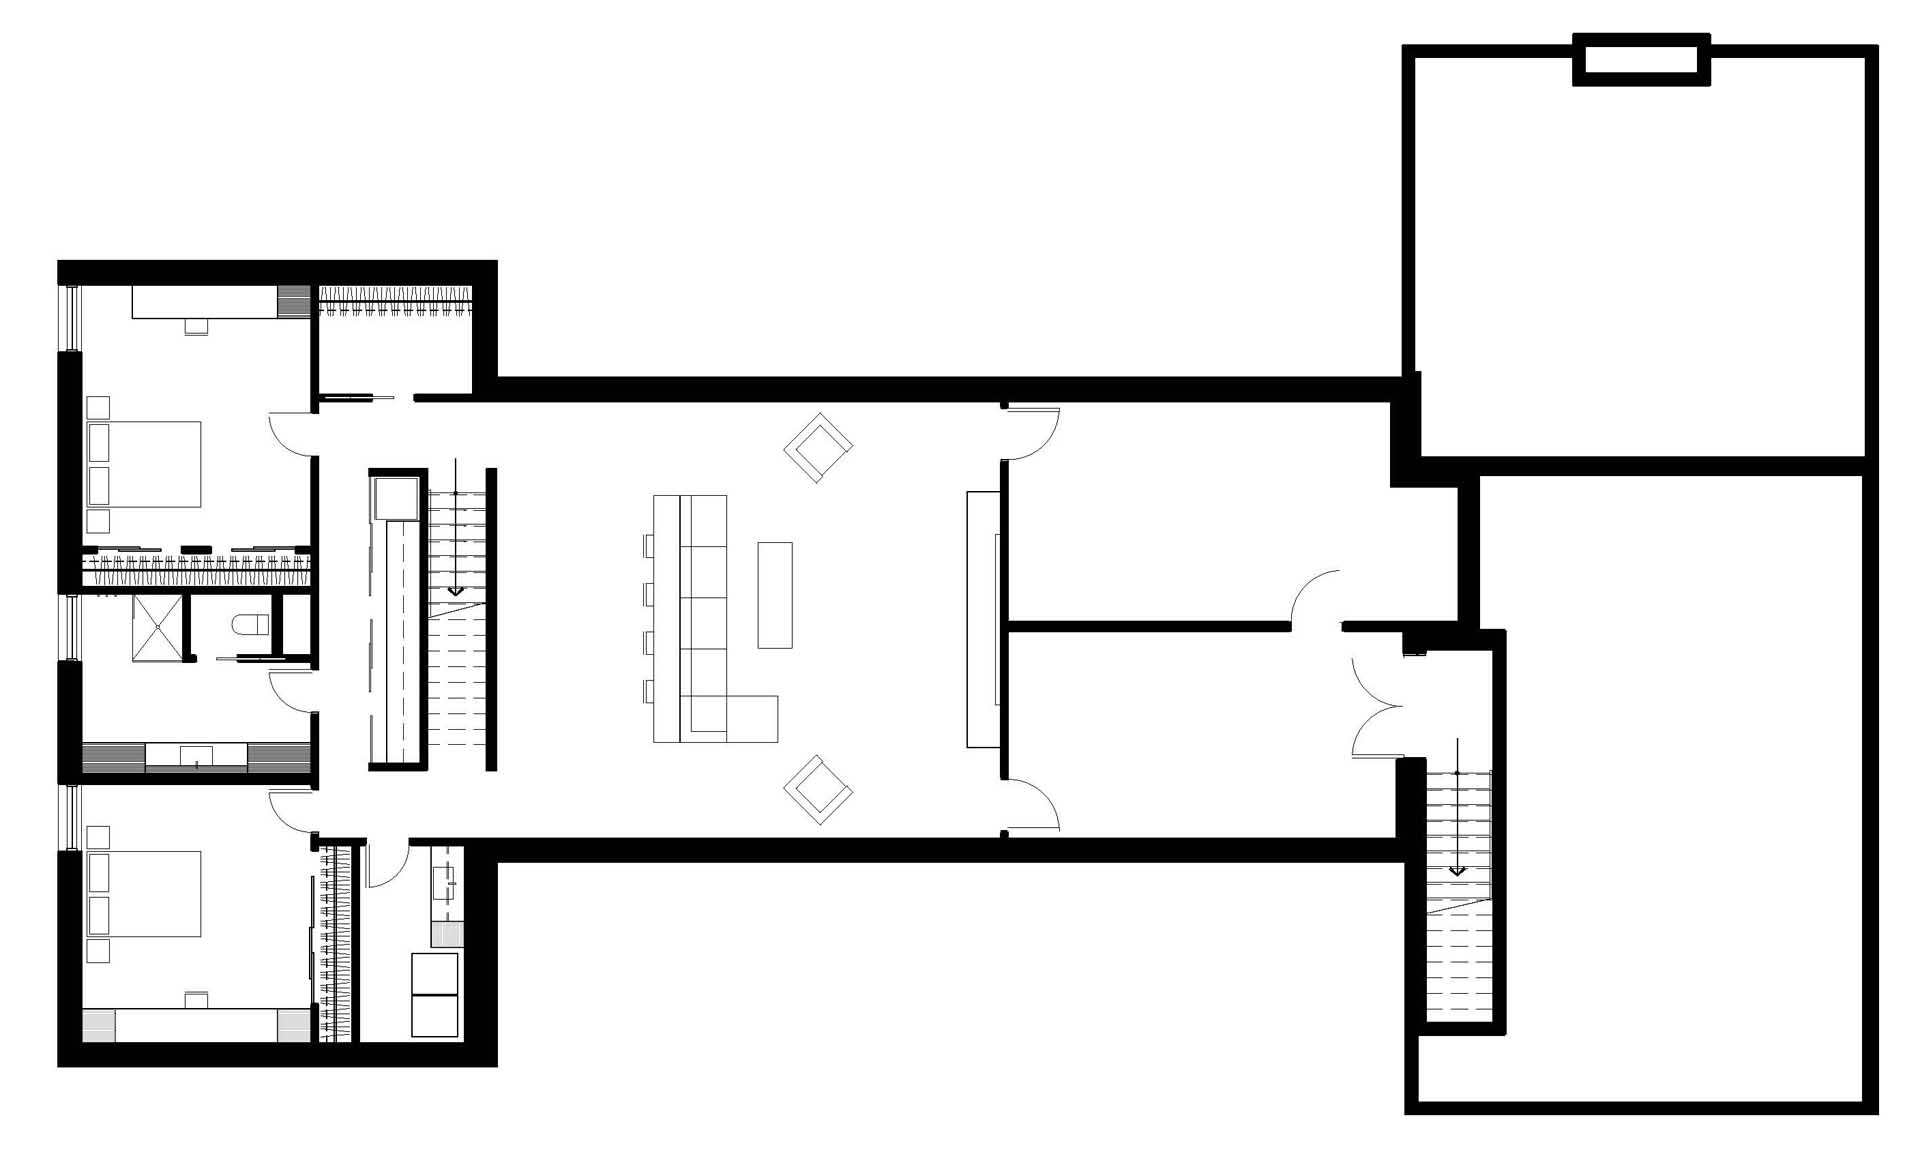 The basement floor plan of a contemporary home.